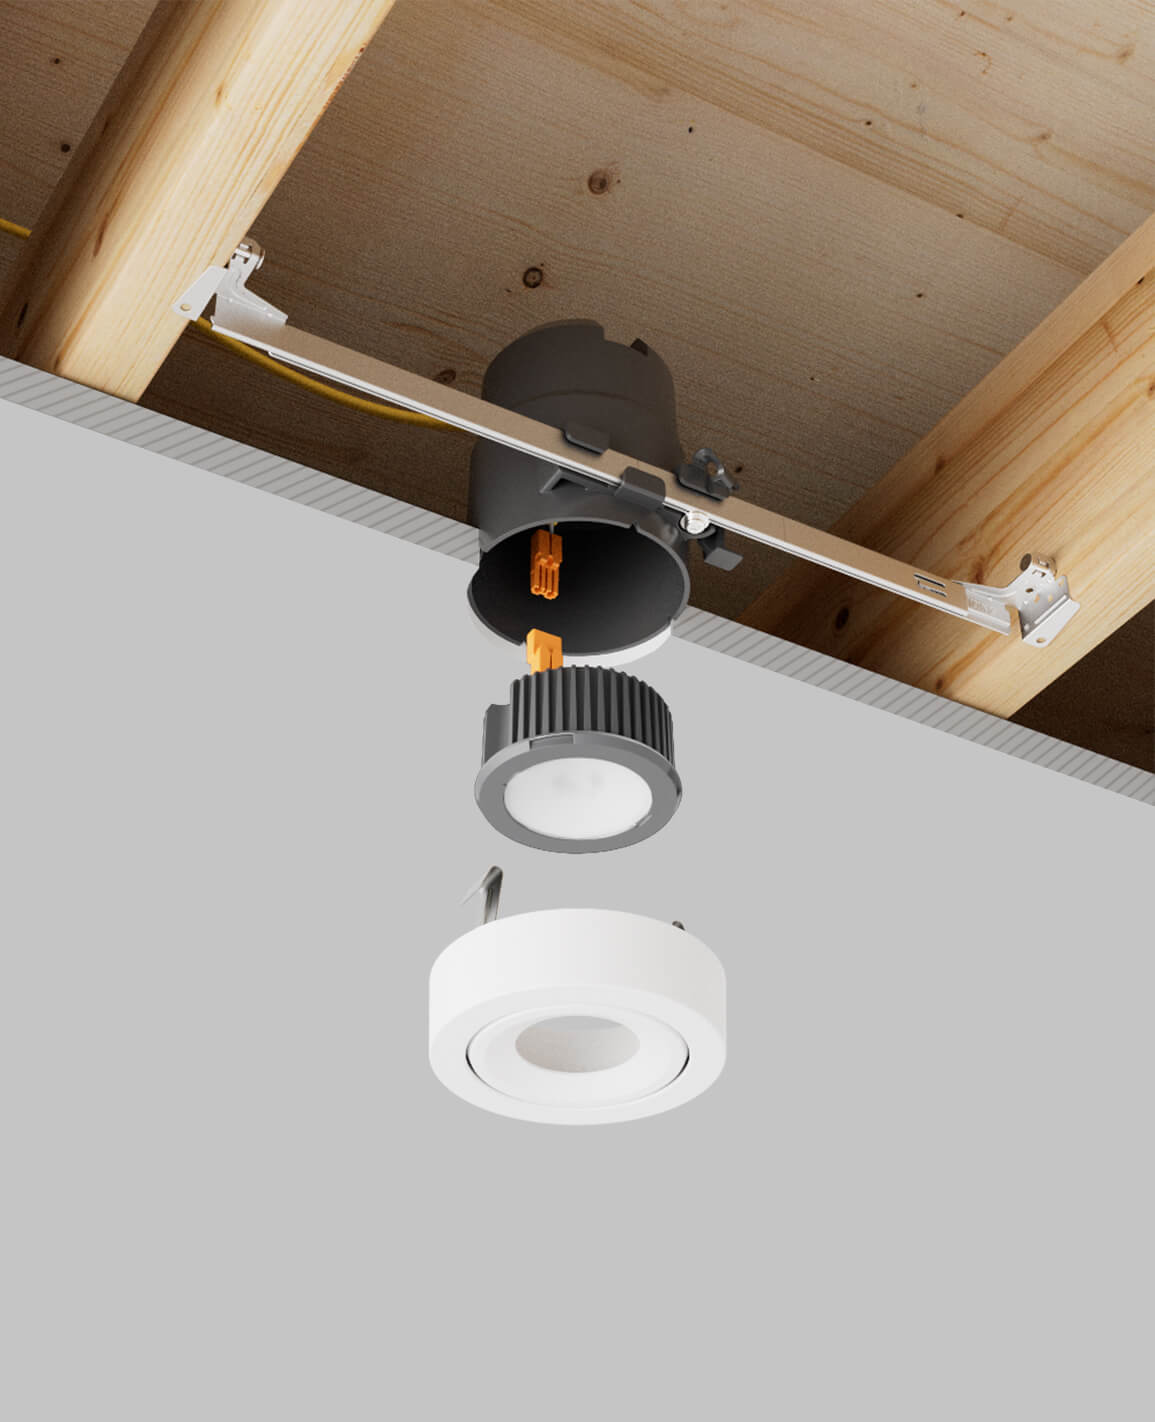 3" recessed light with bar hangers housing and adjustable white trim 